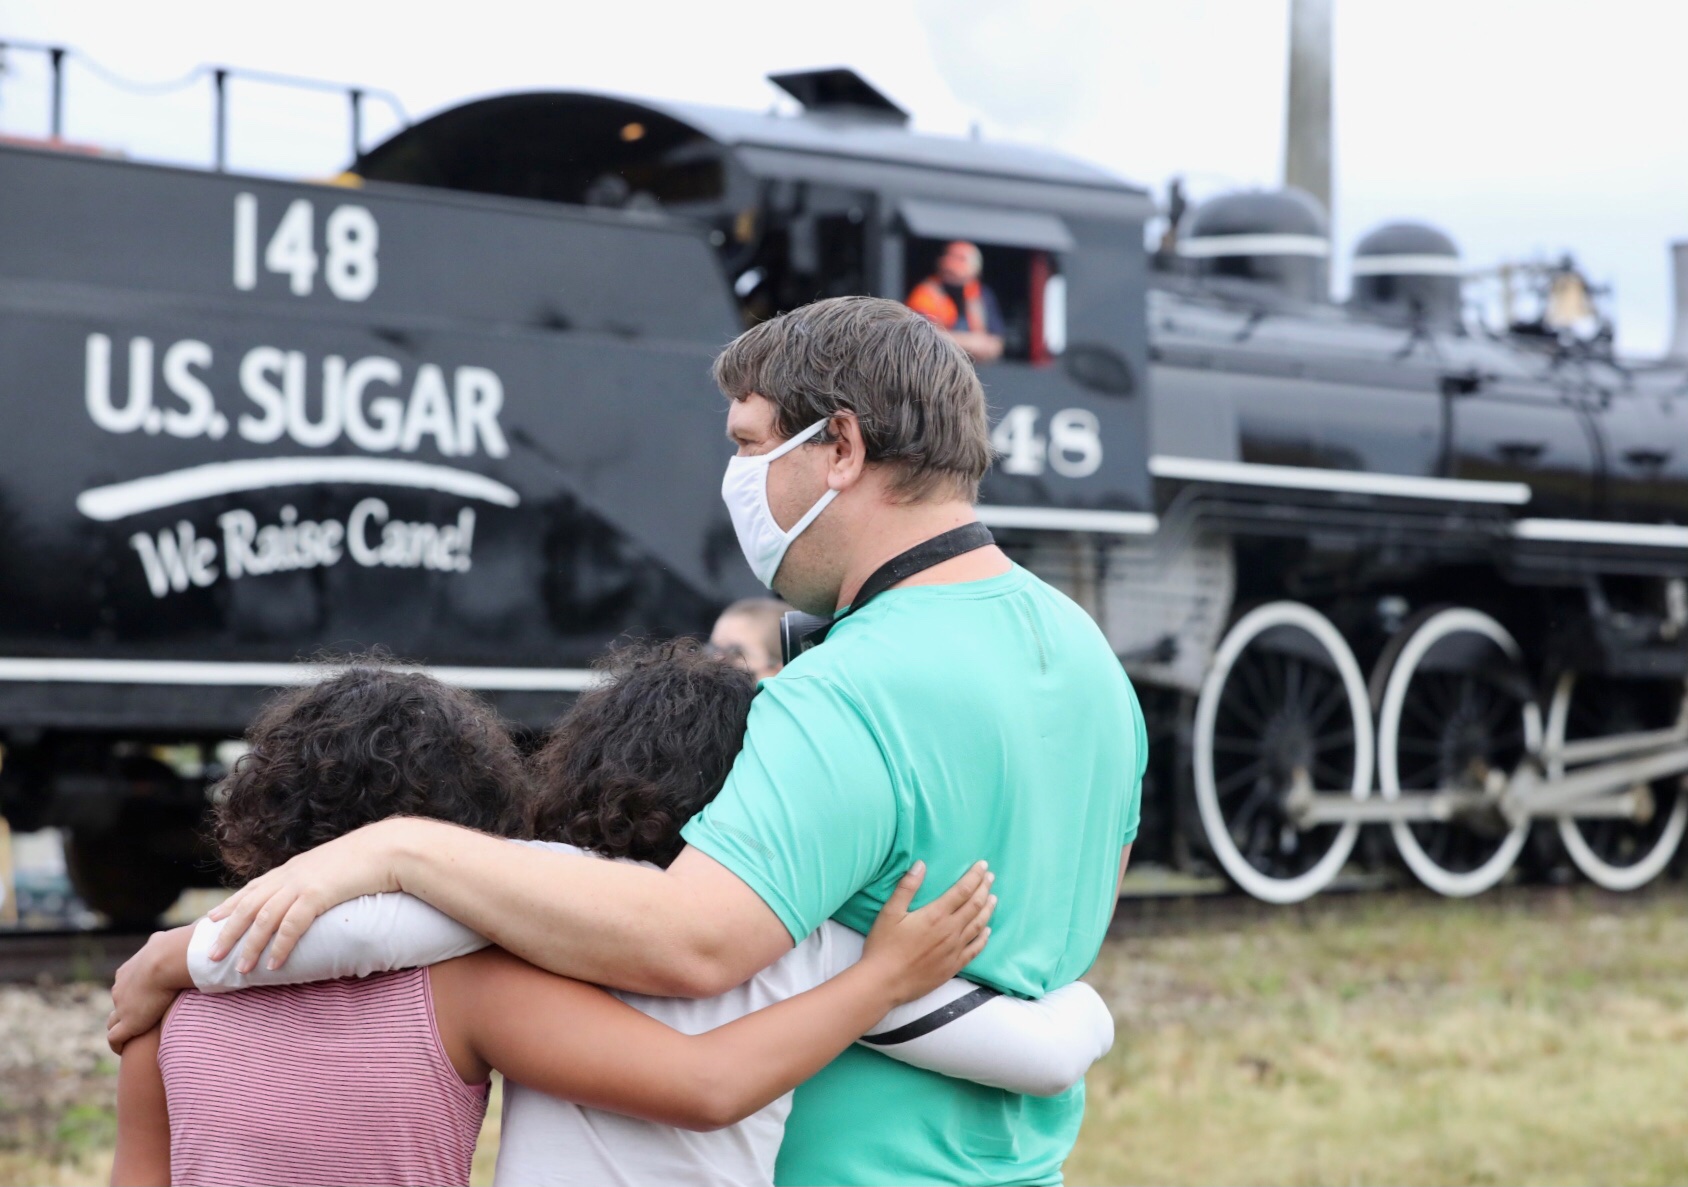 U.S. Sugar’s Historic Steam Locomotive Becomes “Santa Express,” Delivering Early Holiday Greetings and Good Cheer to Glades Communities in Partnership with U.S. Marines and Toys for Tots